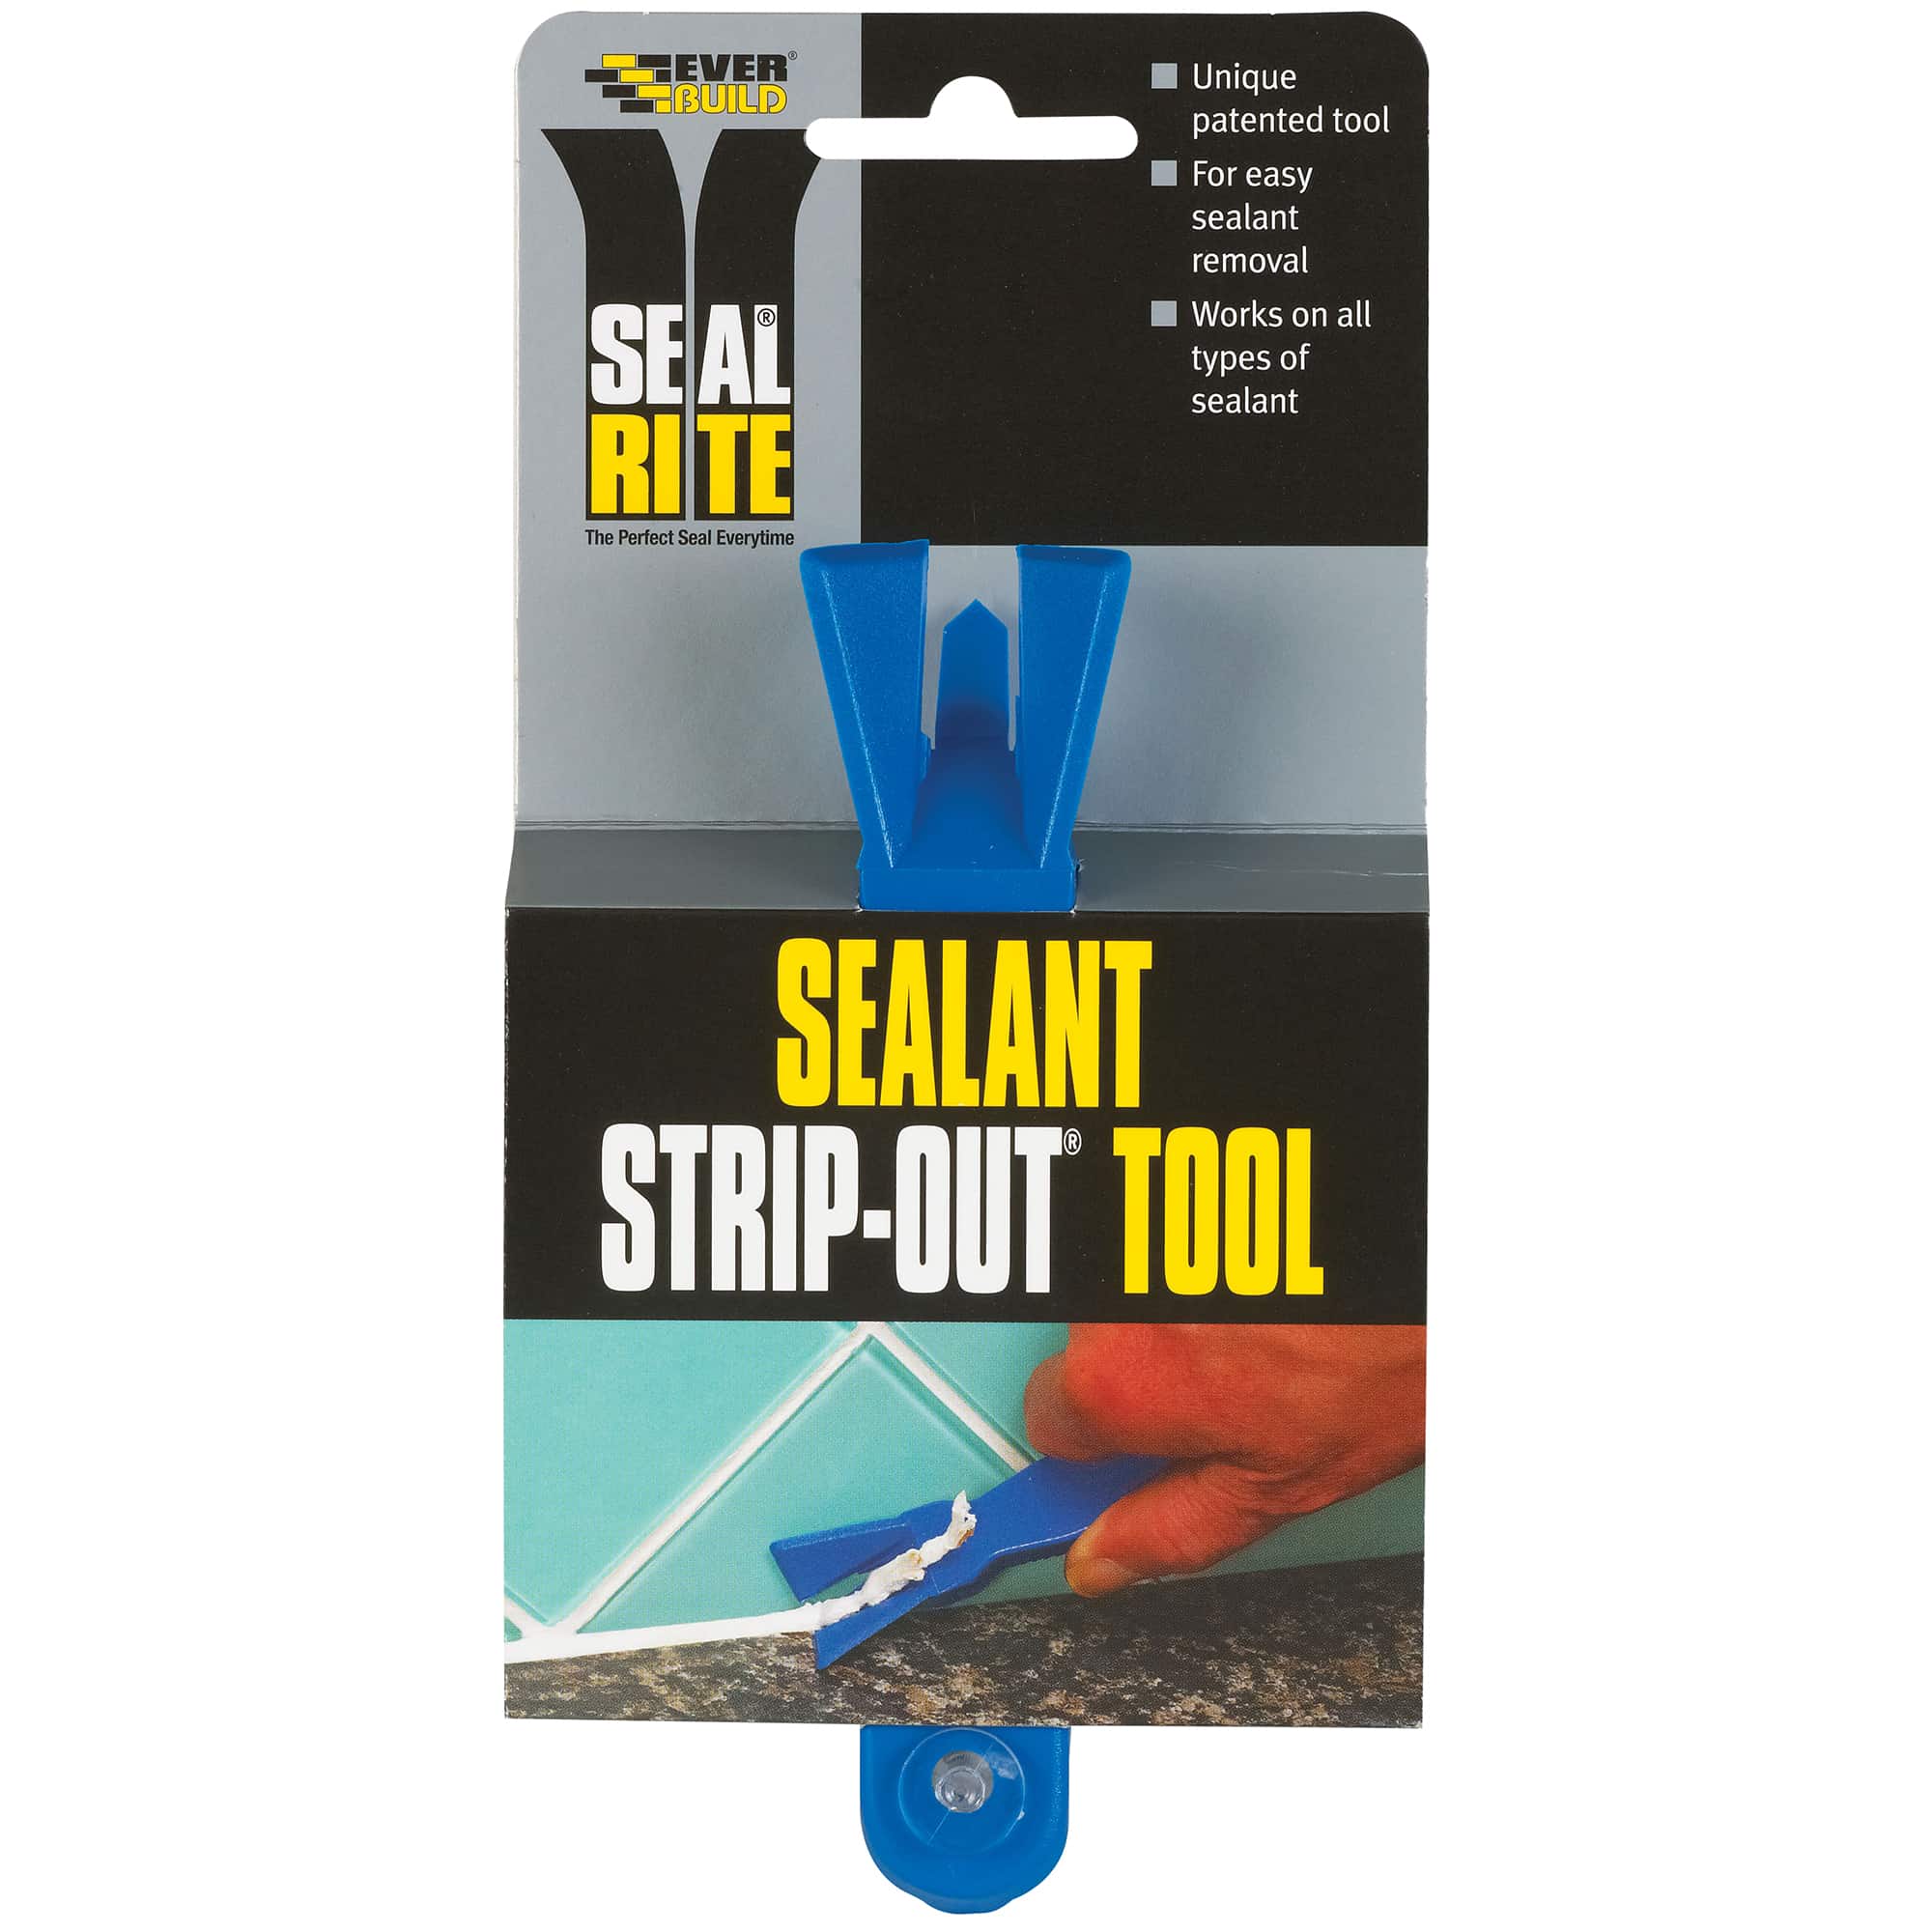 everbuild seal rite sealant strip out tool blue easy use